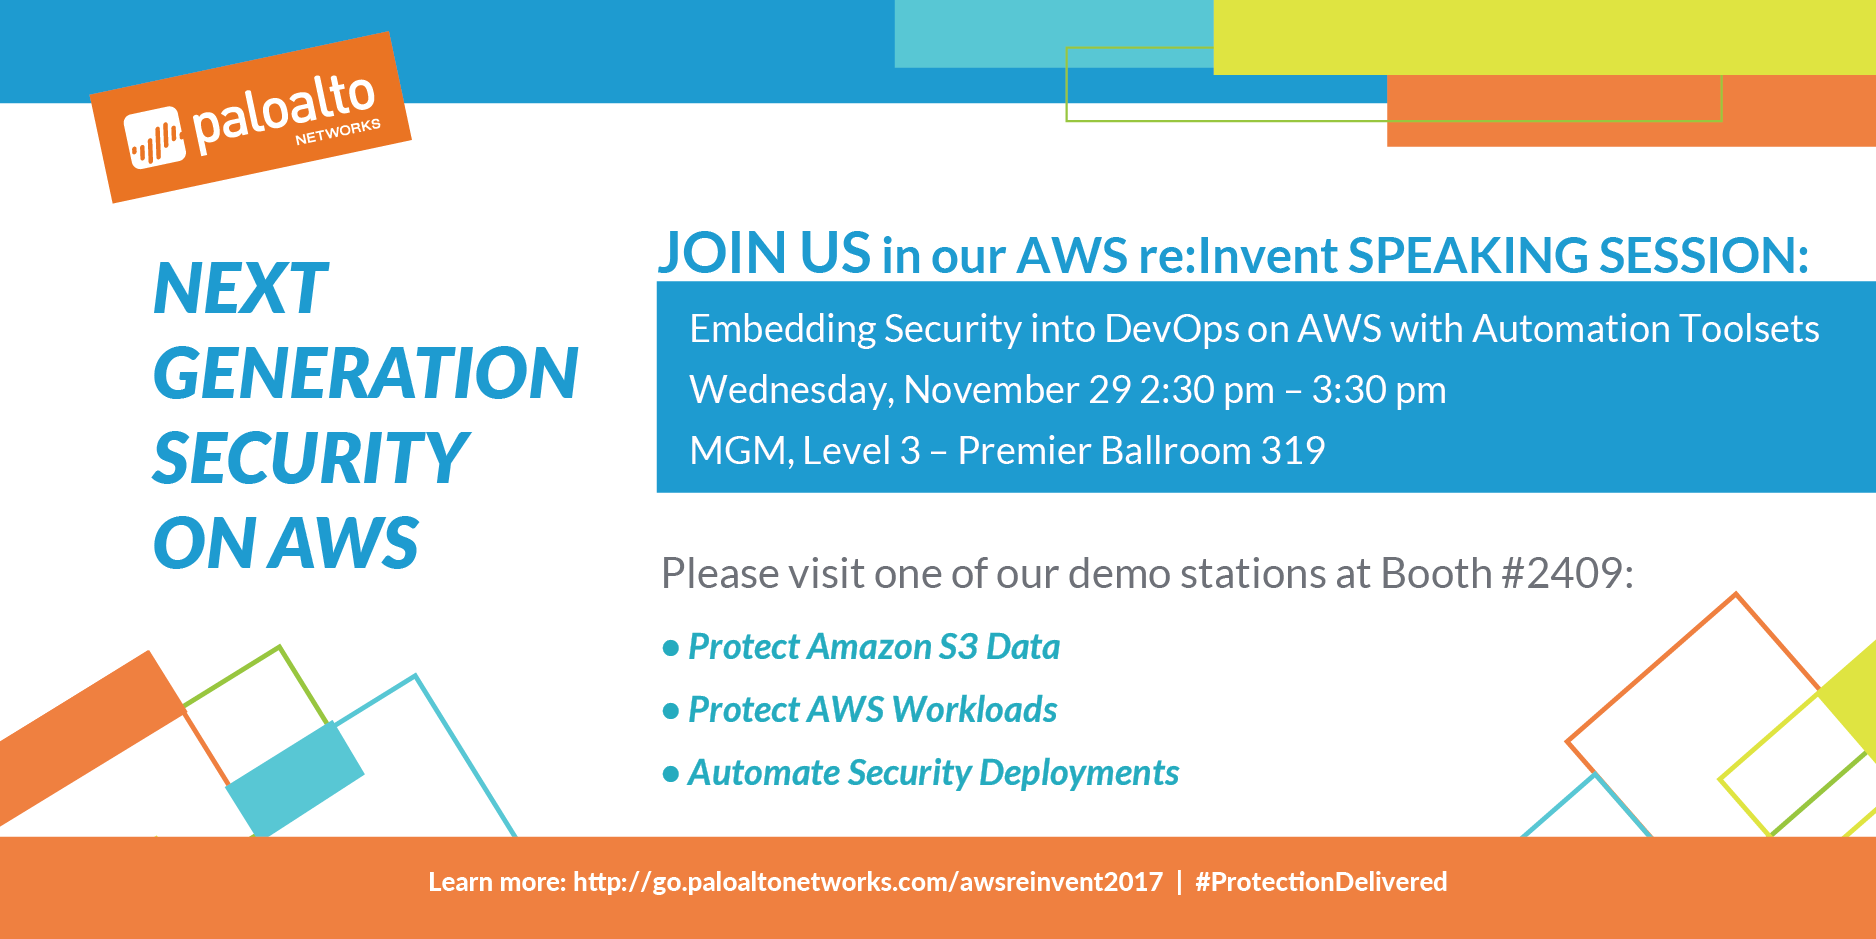 Palo Alto Networks at AWS re:Invent: Amazon GuardDuty Integration and Networking Competency Achieved